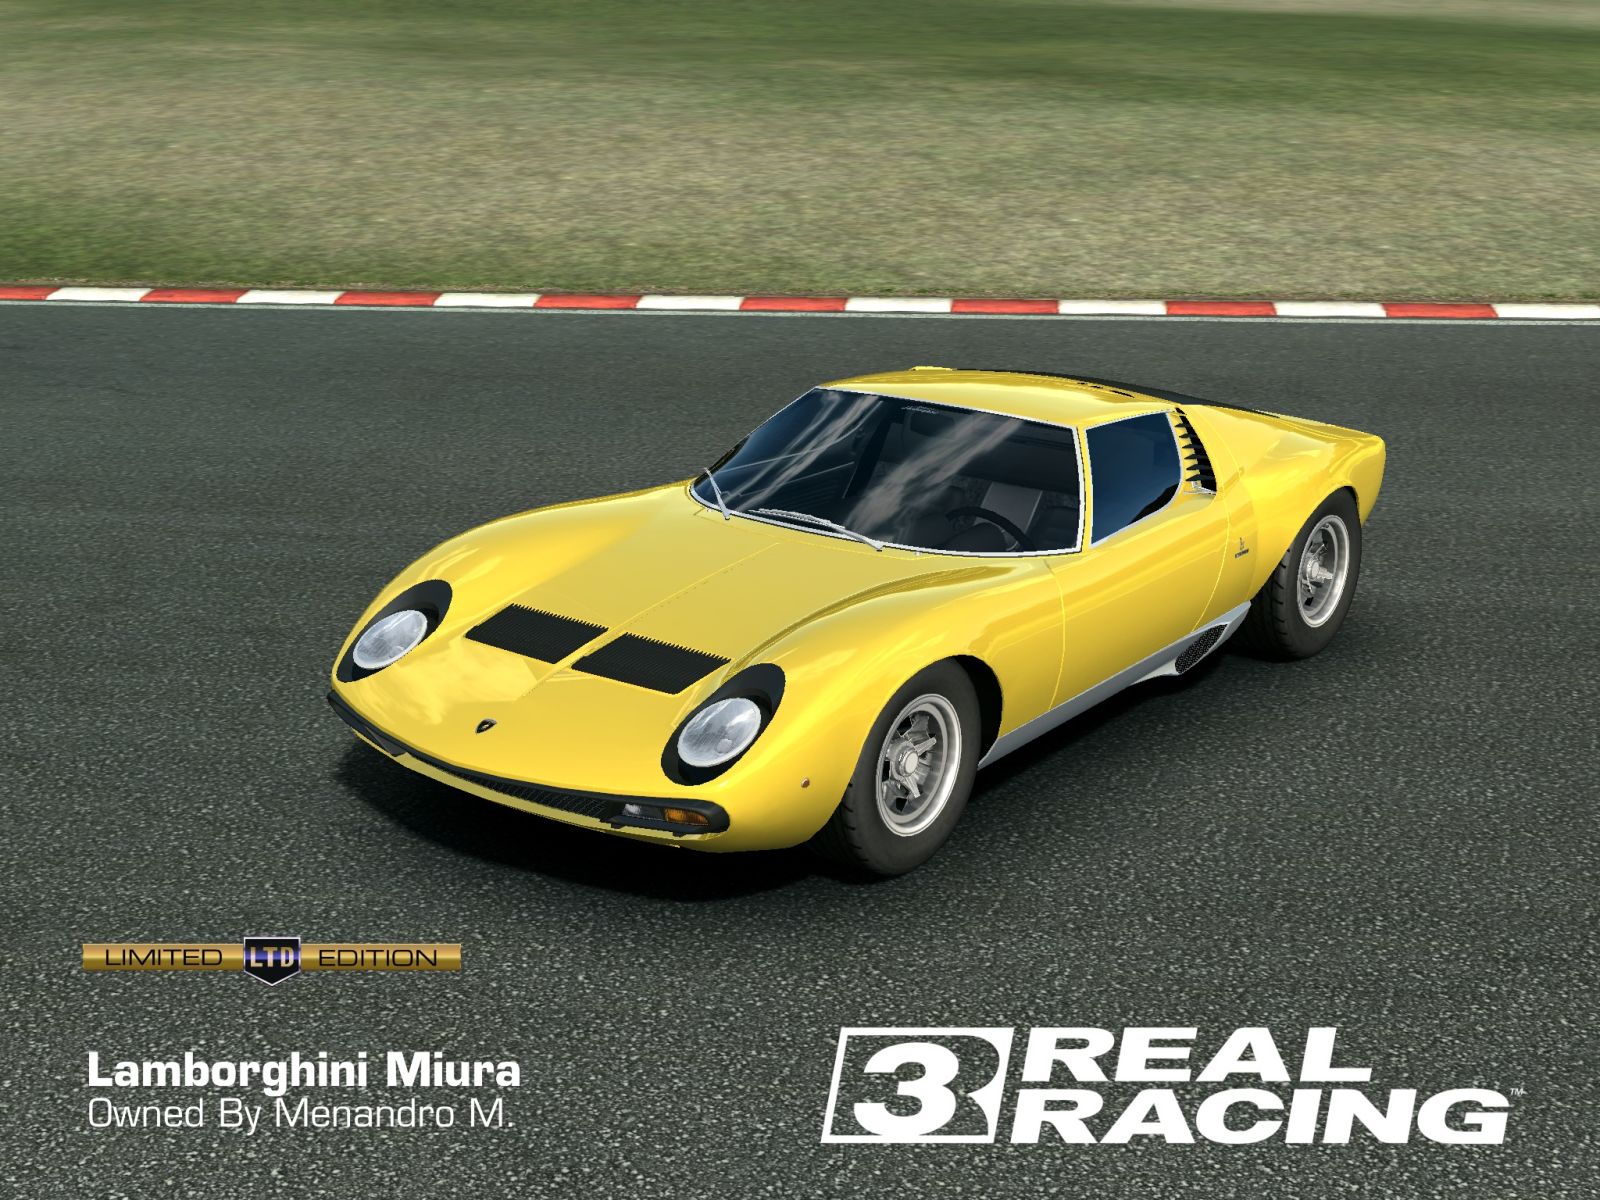 Here is a lovely Miura for your troubles. 